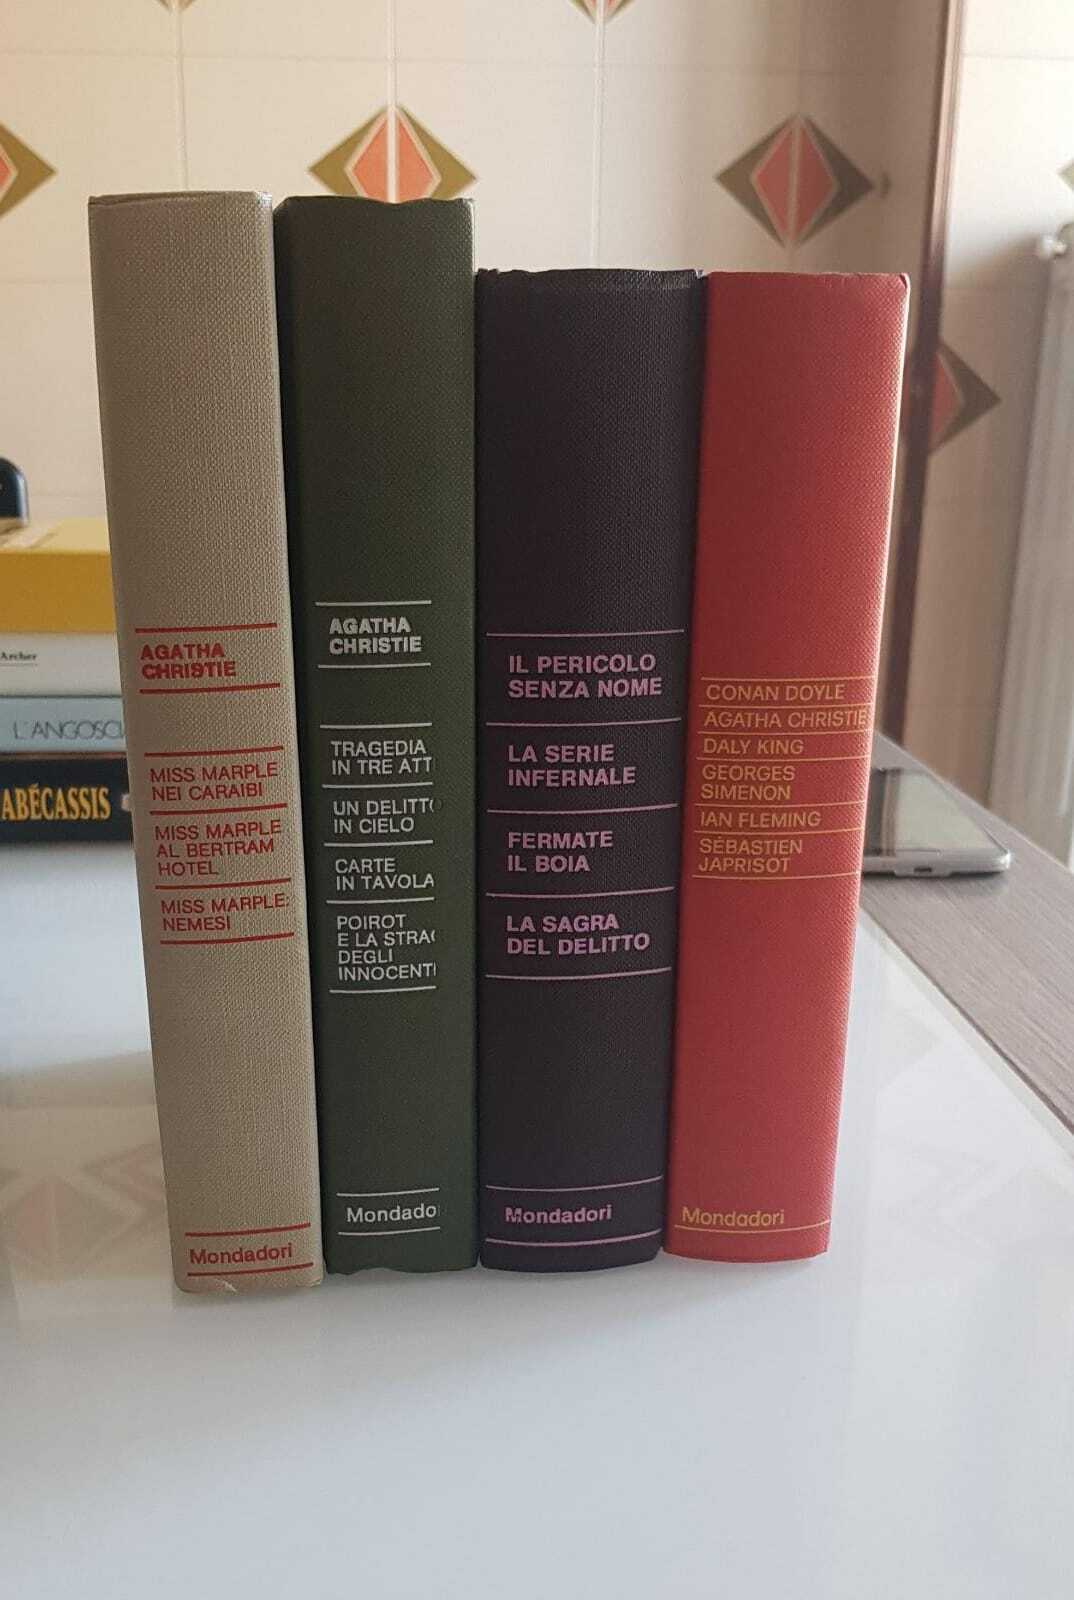 A. Christie + AA vv - stock of 4 novels